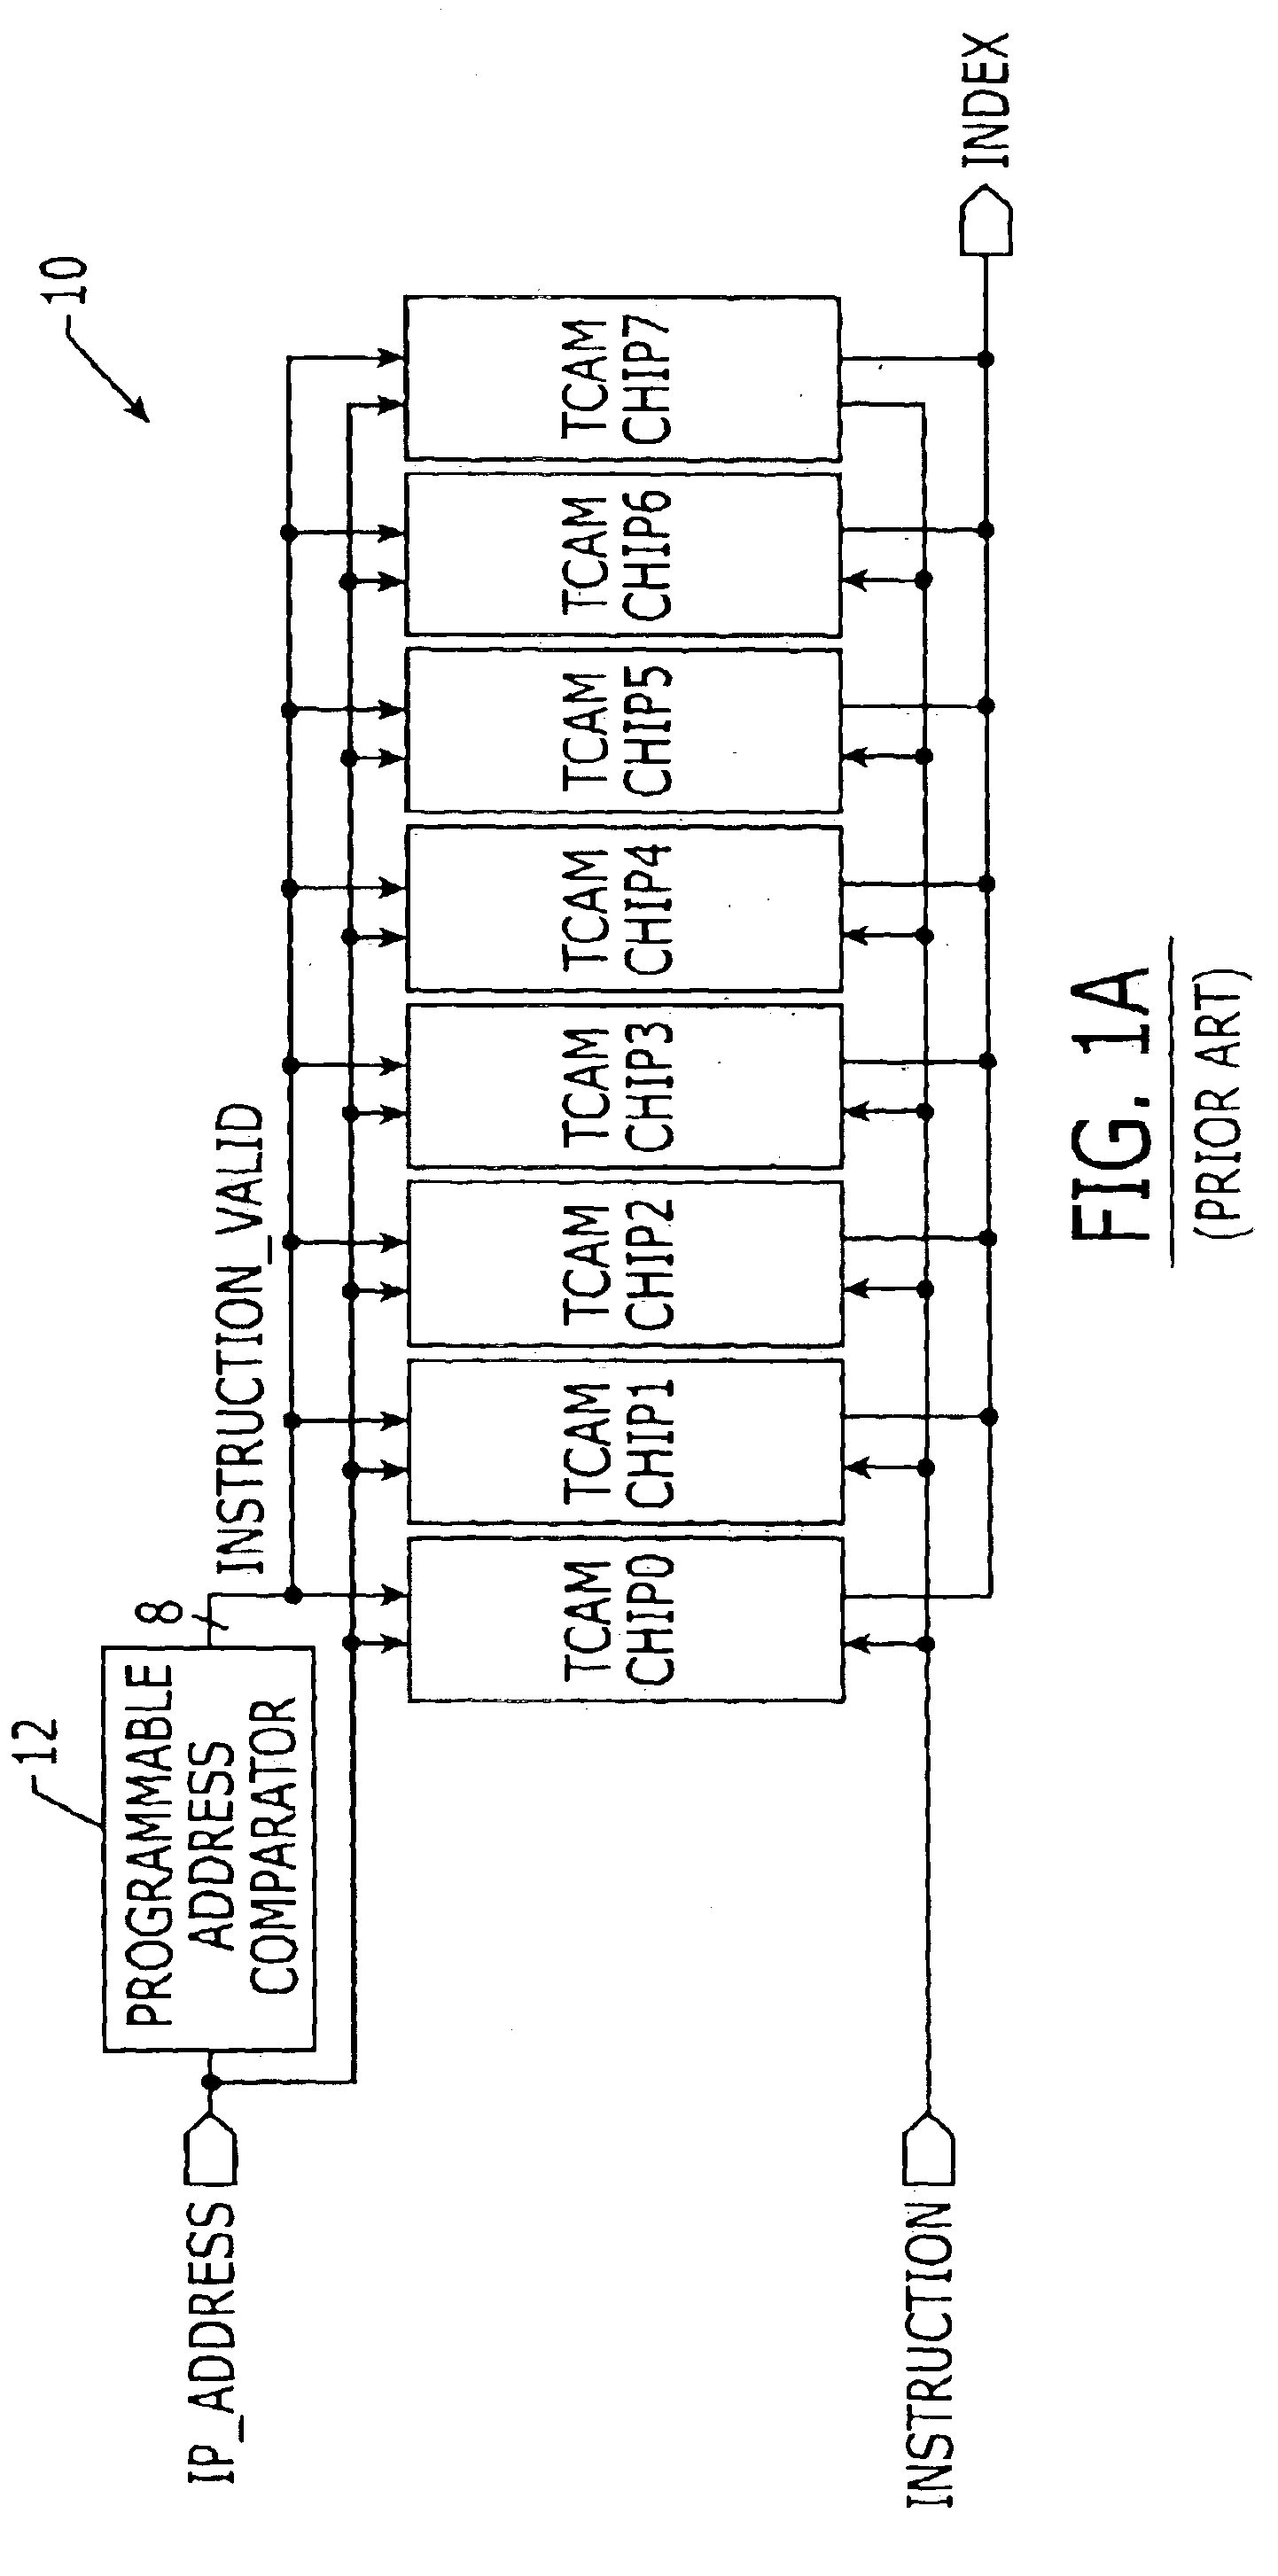 Content addressable memory (CAM) devices with dual-function check bit cells that support column redundancy and check bit cells with reduced susceptibility to soft errors